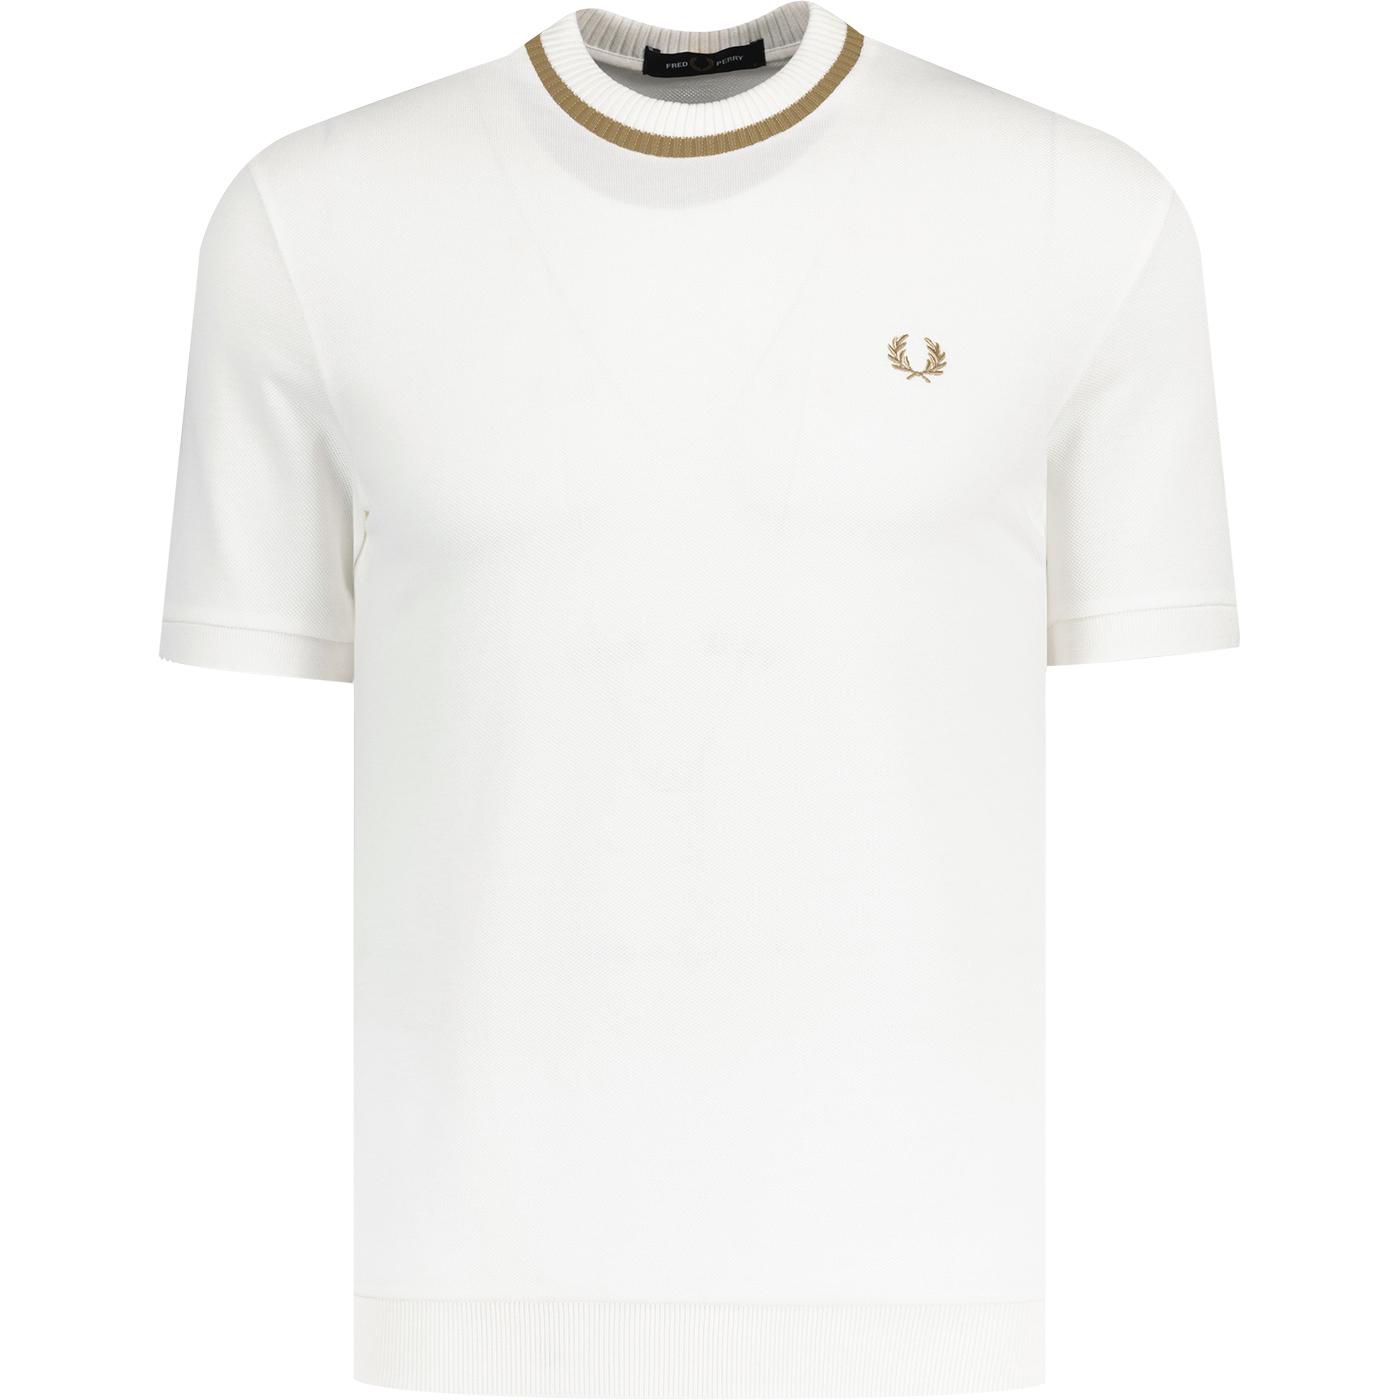 M7 Fred Perry Retro Pique Tipped Crew Neck Tee SW